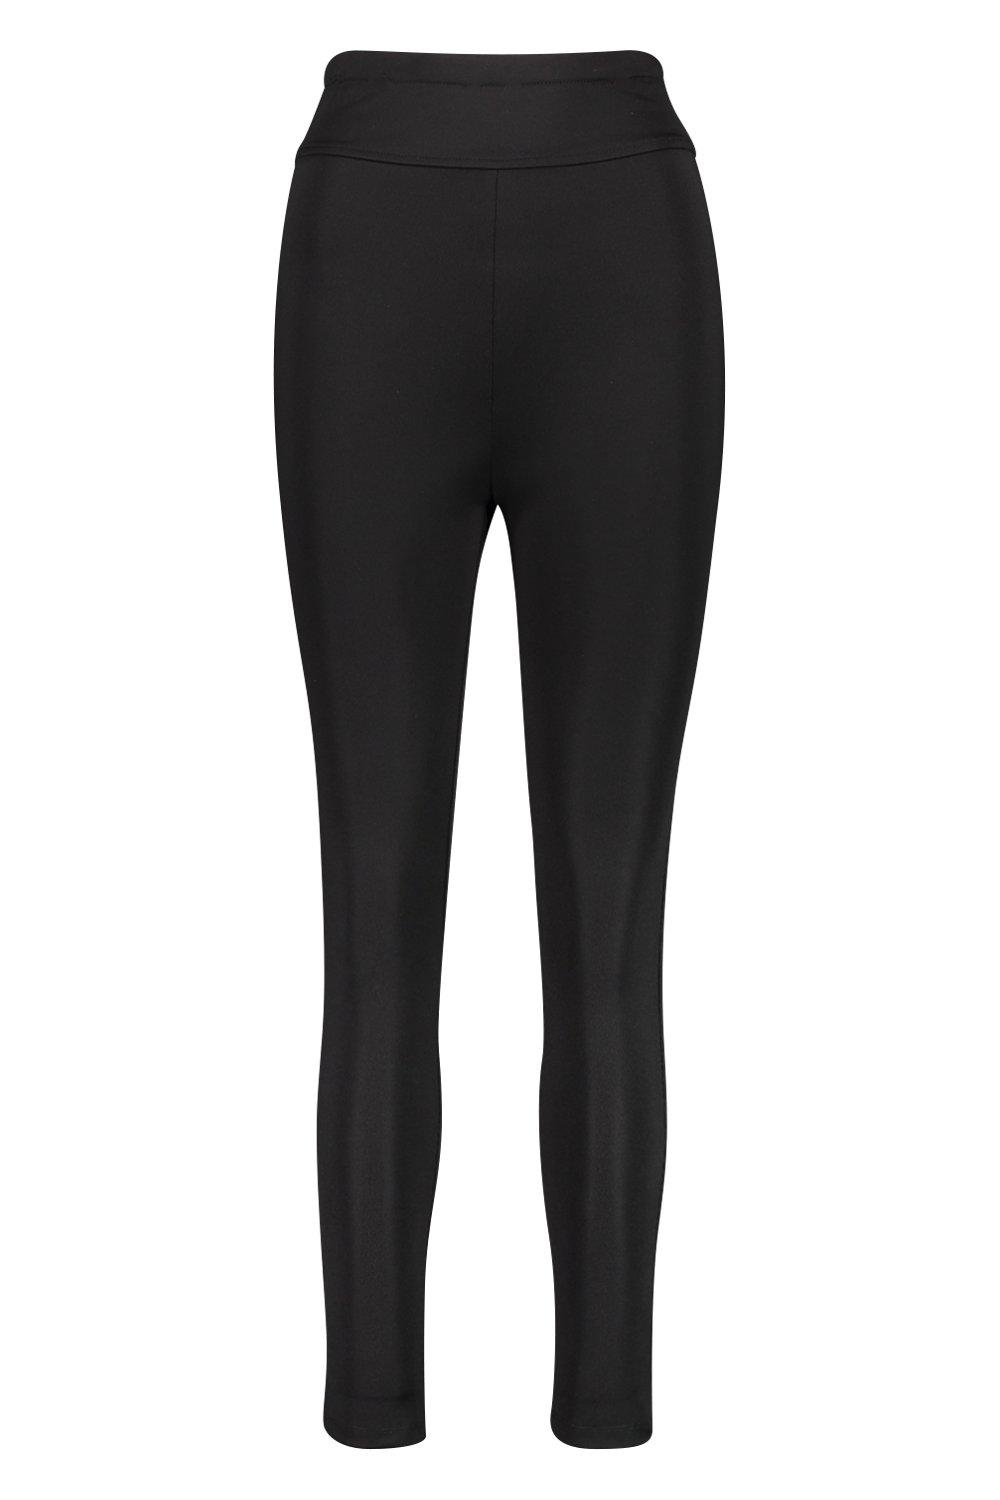 SLIM High Waisted Compression Leggings with Silver Anti-bacterial